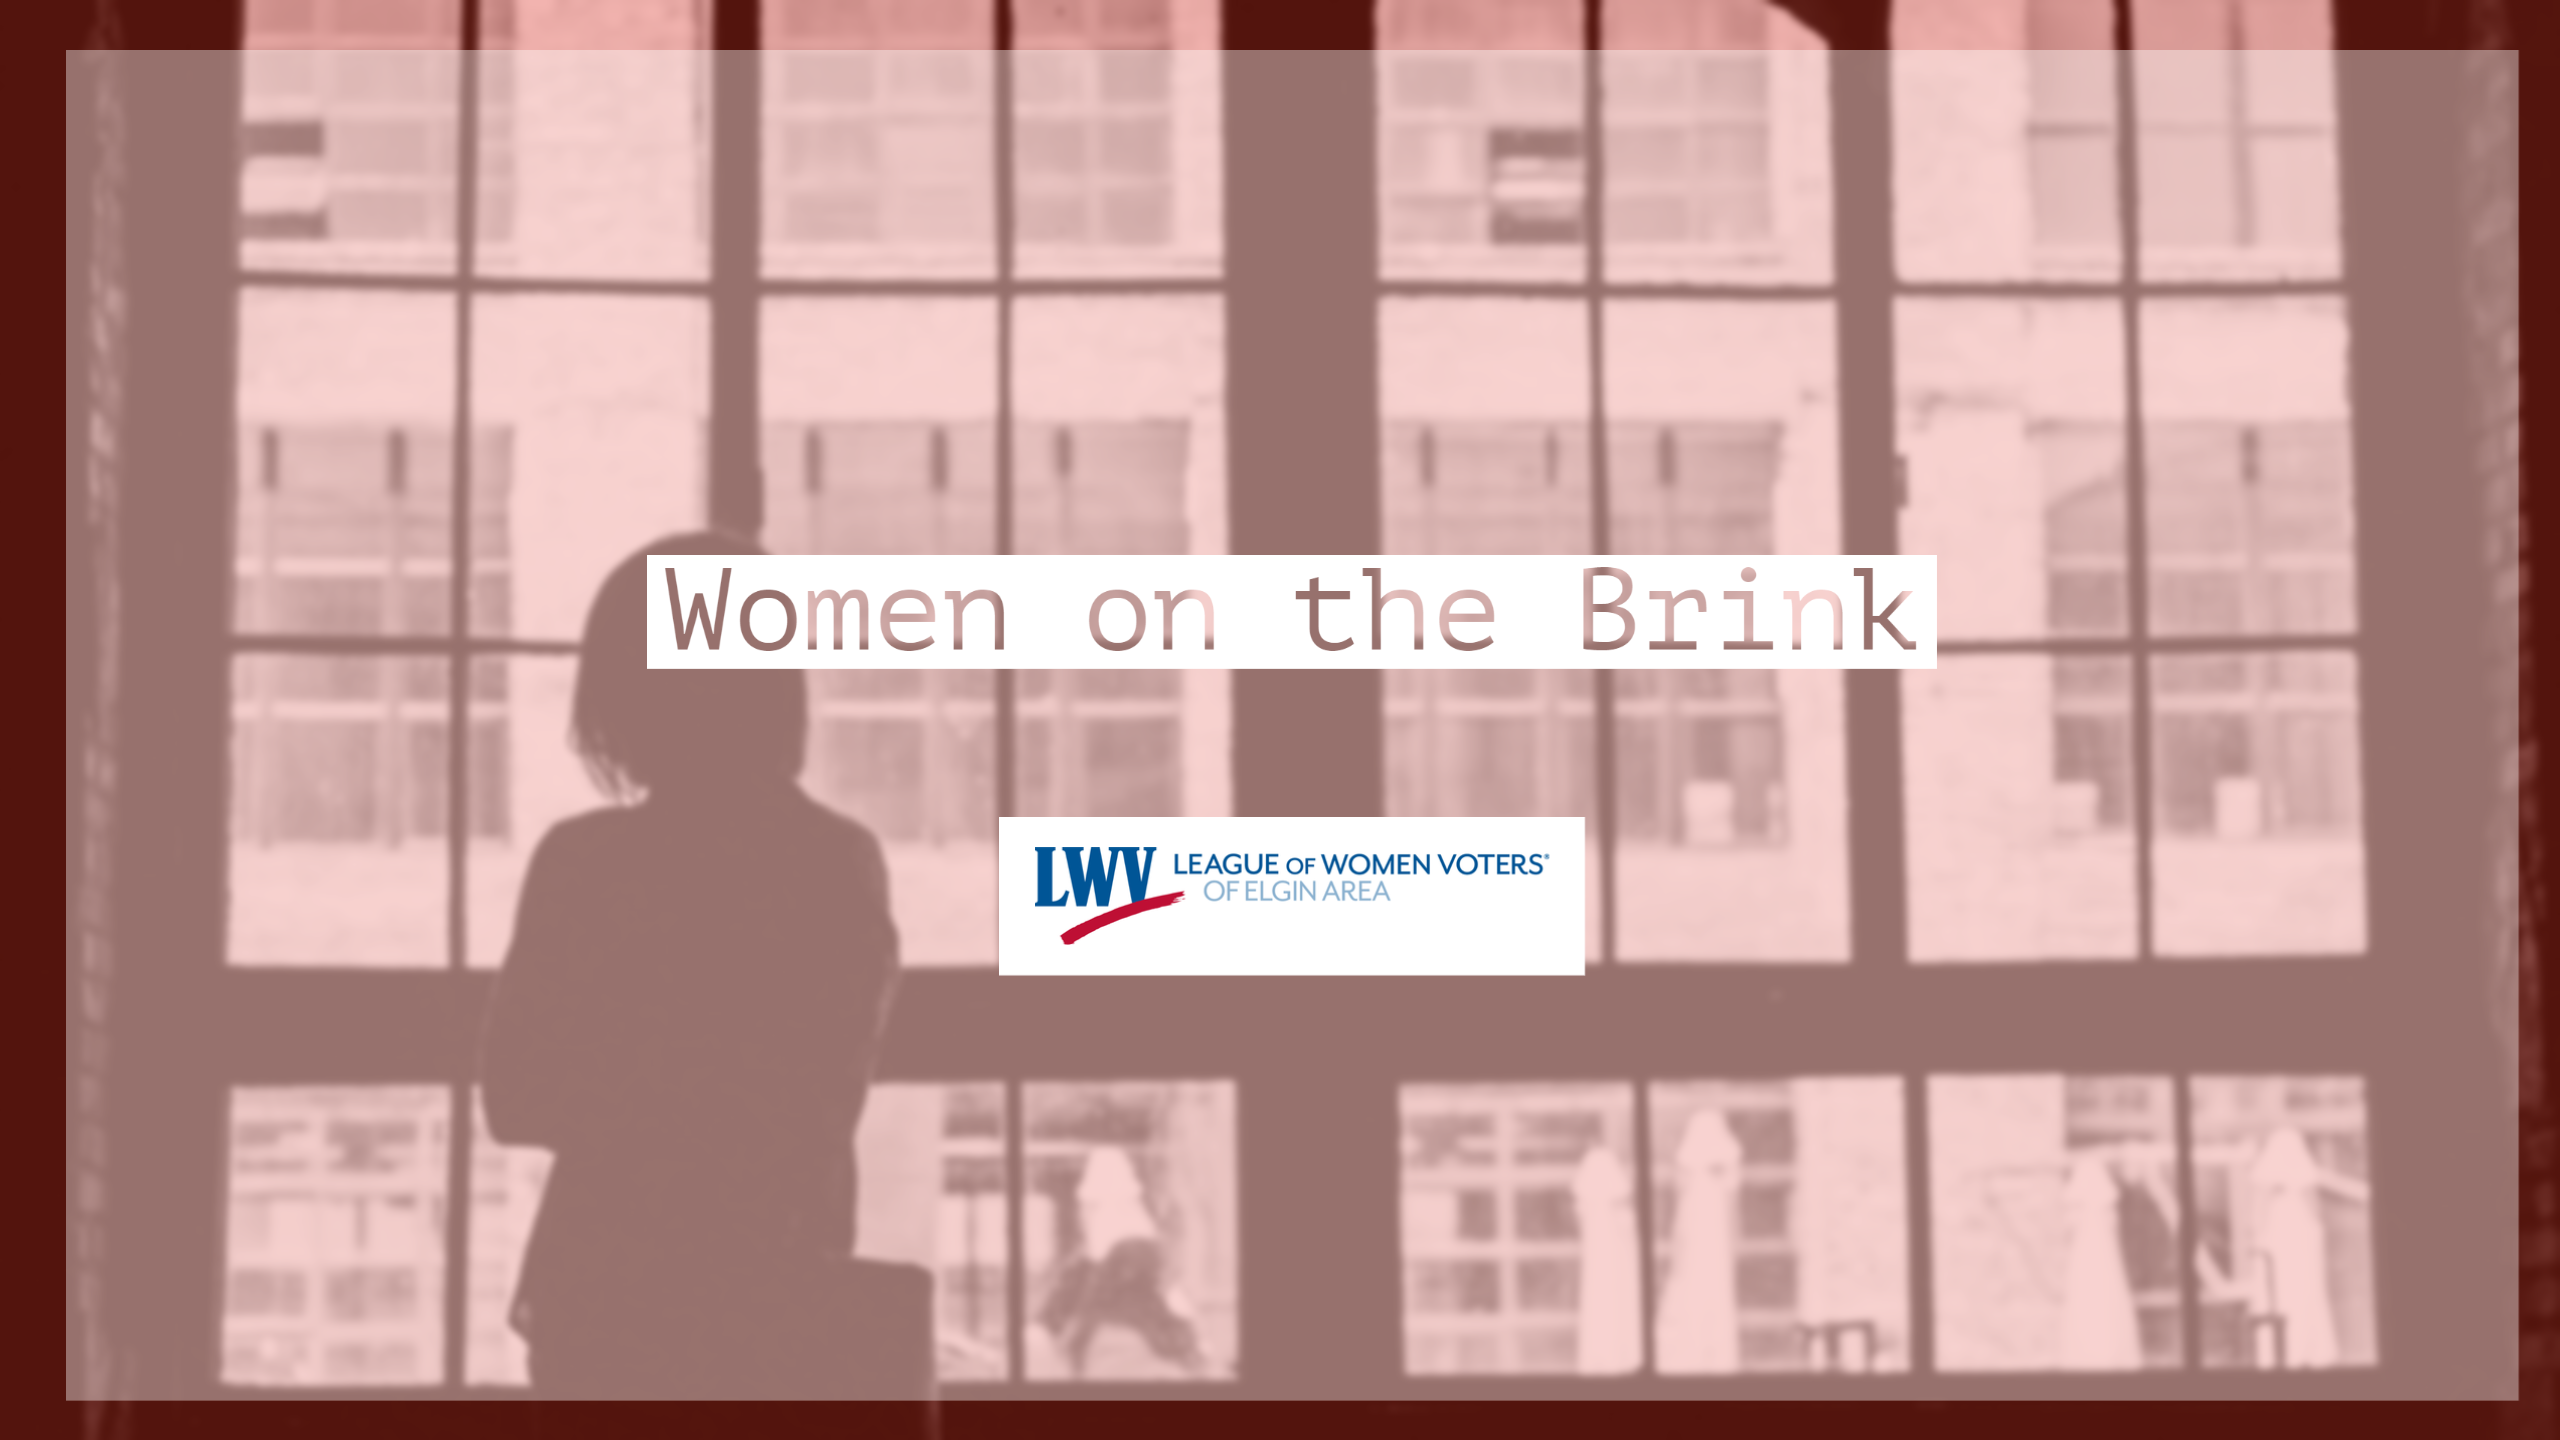 Women on the Brink event